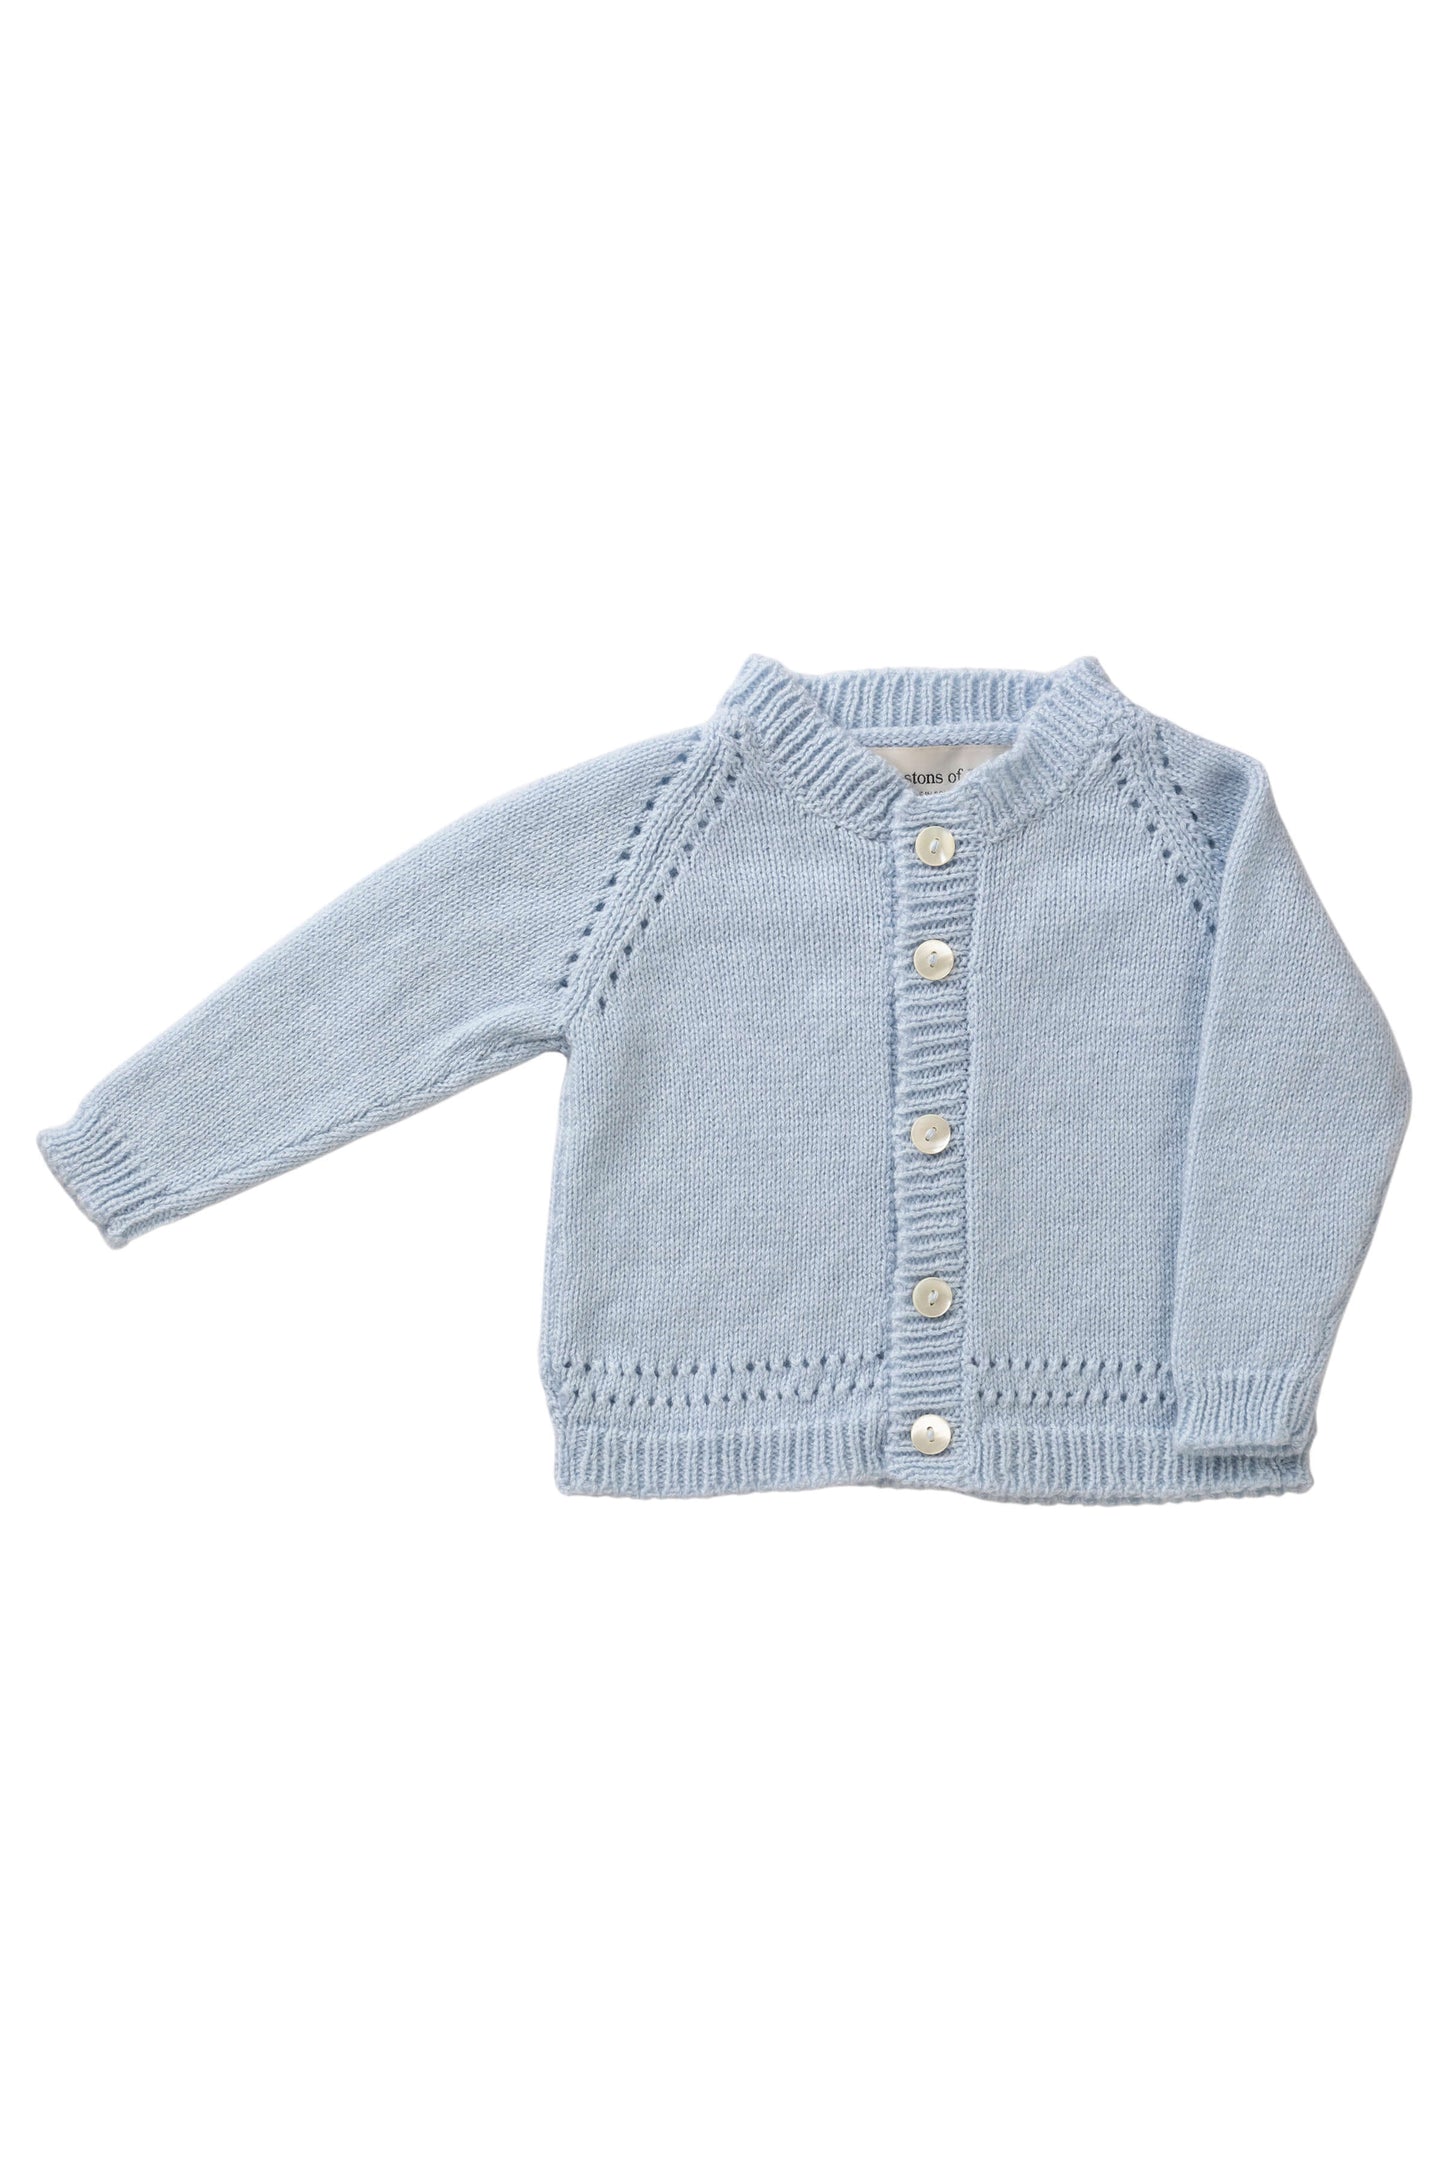 Johnstons of Elgin Baby Handknits Powder Blue Hand Knit Cashmere Baby Cardigan 78313SD0167